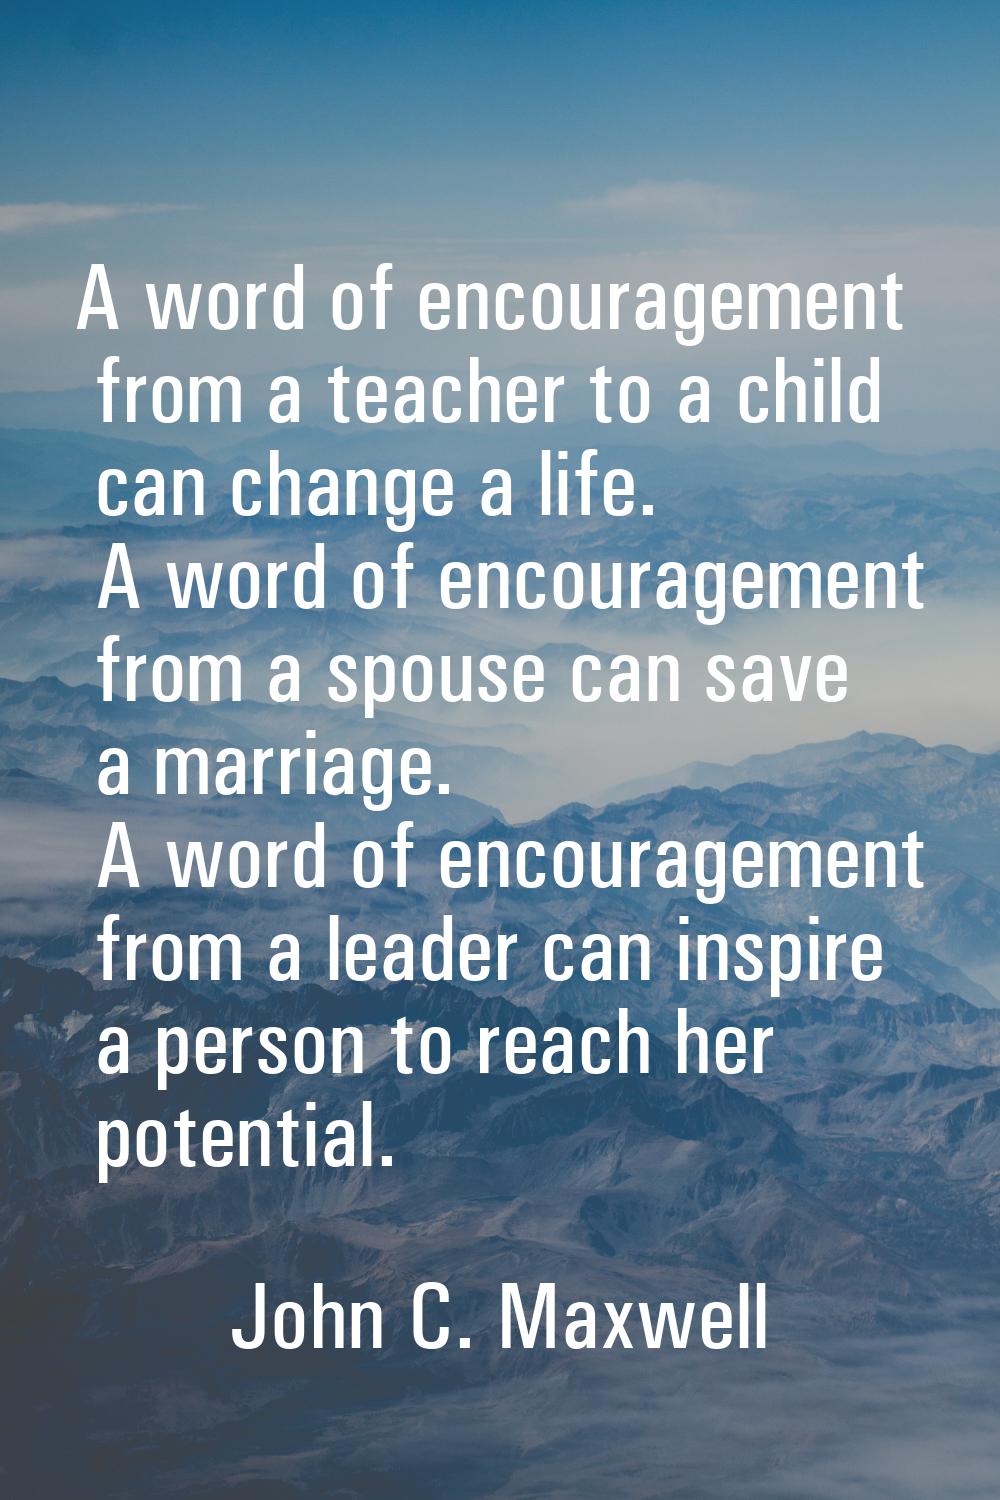 A word of encouragement from a teacher to a child can change a life. A word of encouragement from a